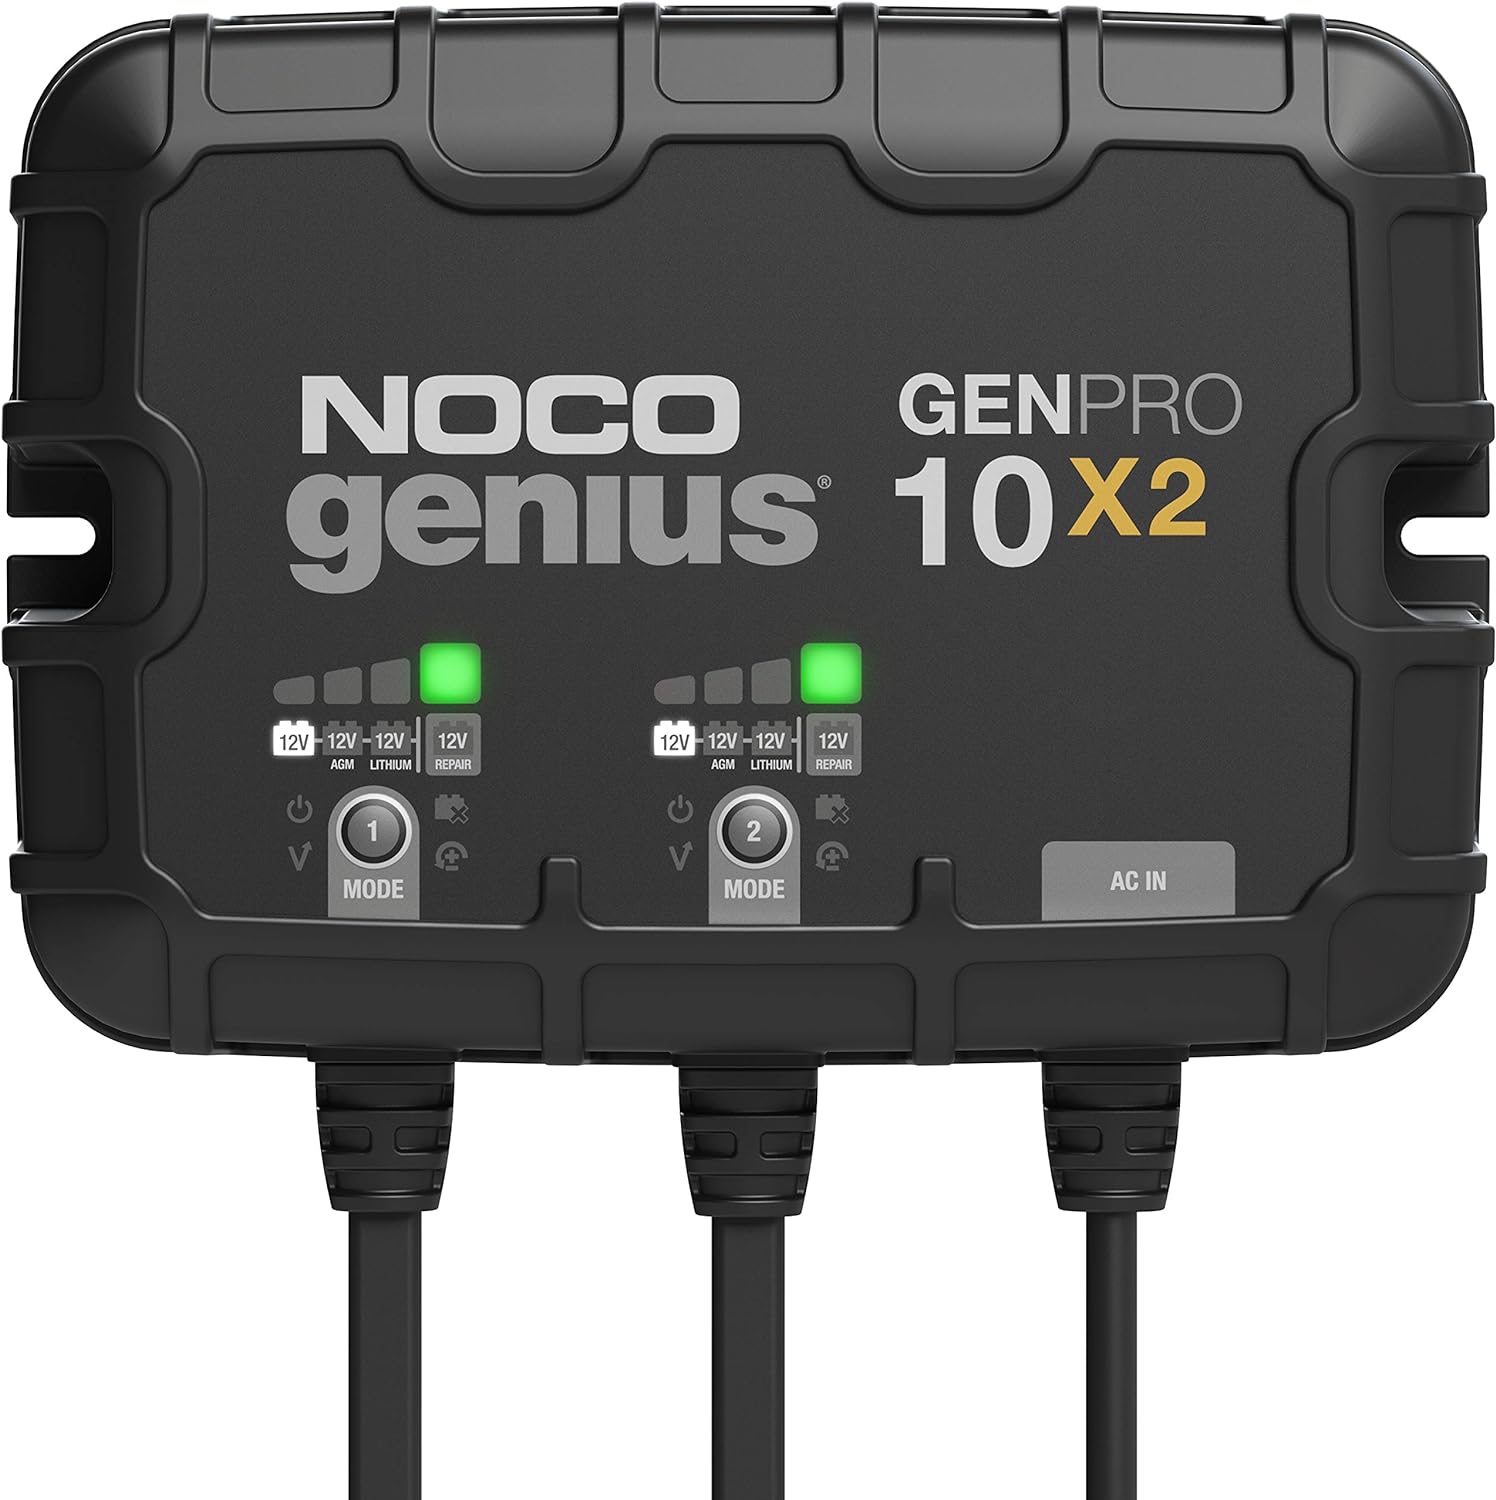 NOCO Genius GENPRO10X2, 2-Bank, 20A (10A/Bank) Smart Marine Battery Charger, 12V Waterproof Onboard Boat Charger, Battery Maintainer and Desulfator for AGM, Lithium (LiFePO4) and Deep-Cycle Batteries - NOCO Genius GENPRO10X2 2-Bank Battery Charger Review